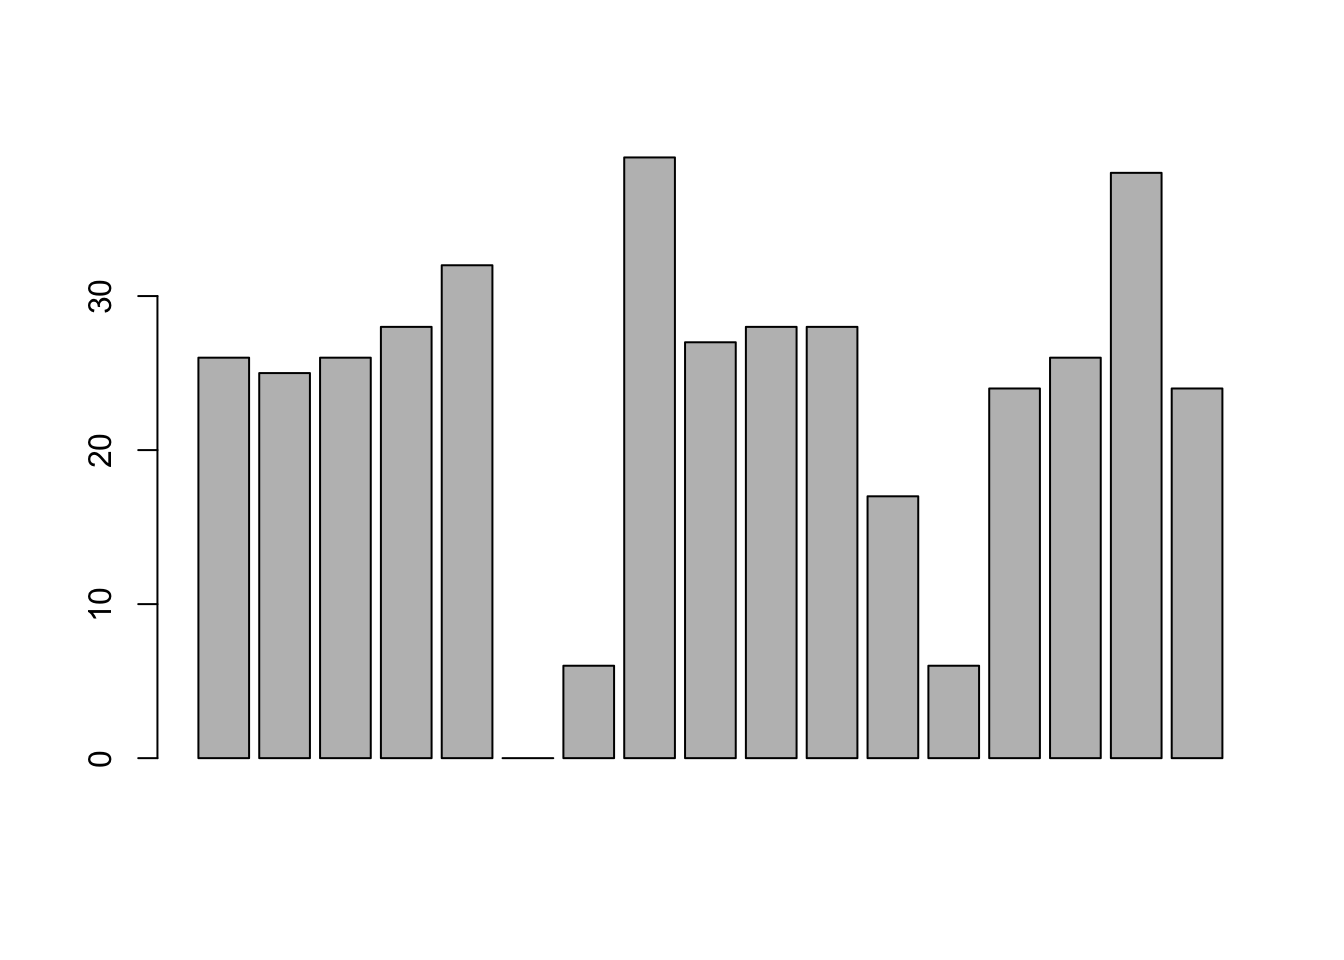 the simplest version of a bargraph, containing the data but no labels